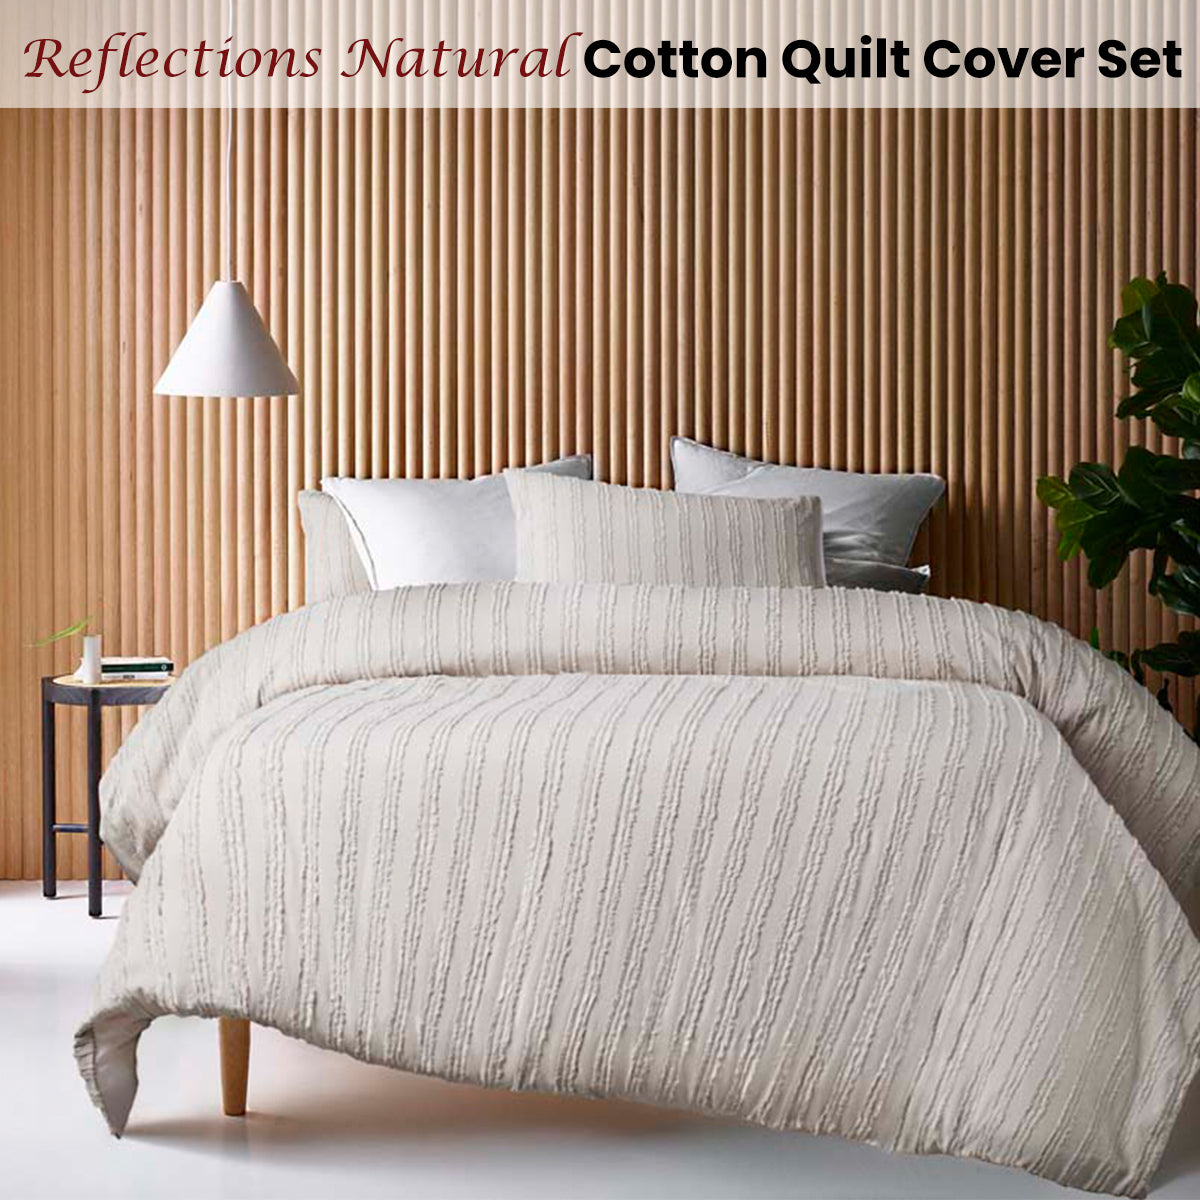 Reflections Natural Cotton Quilt Cover Set | Single